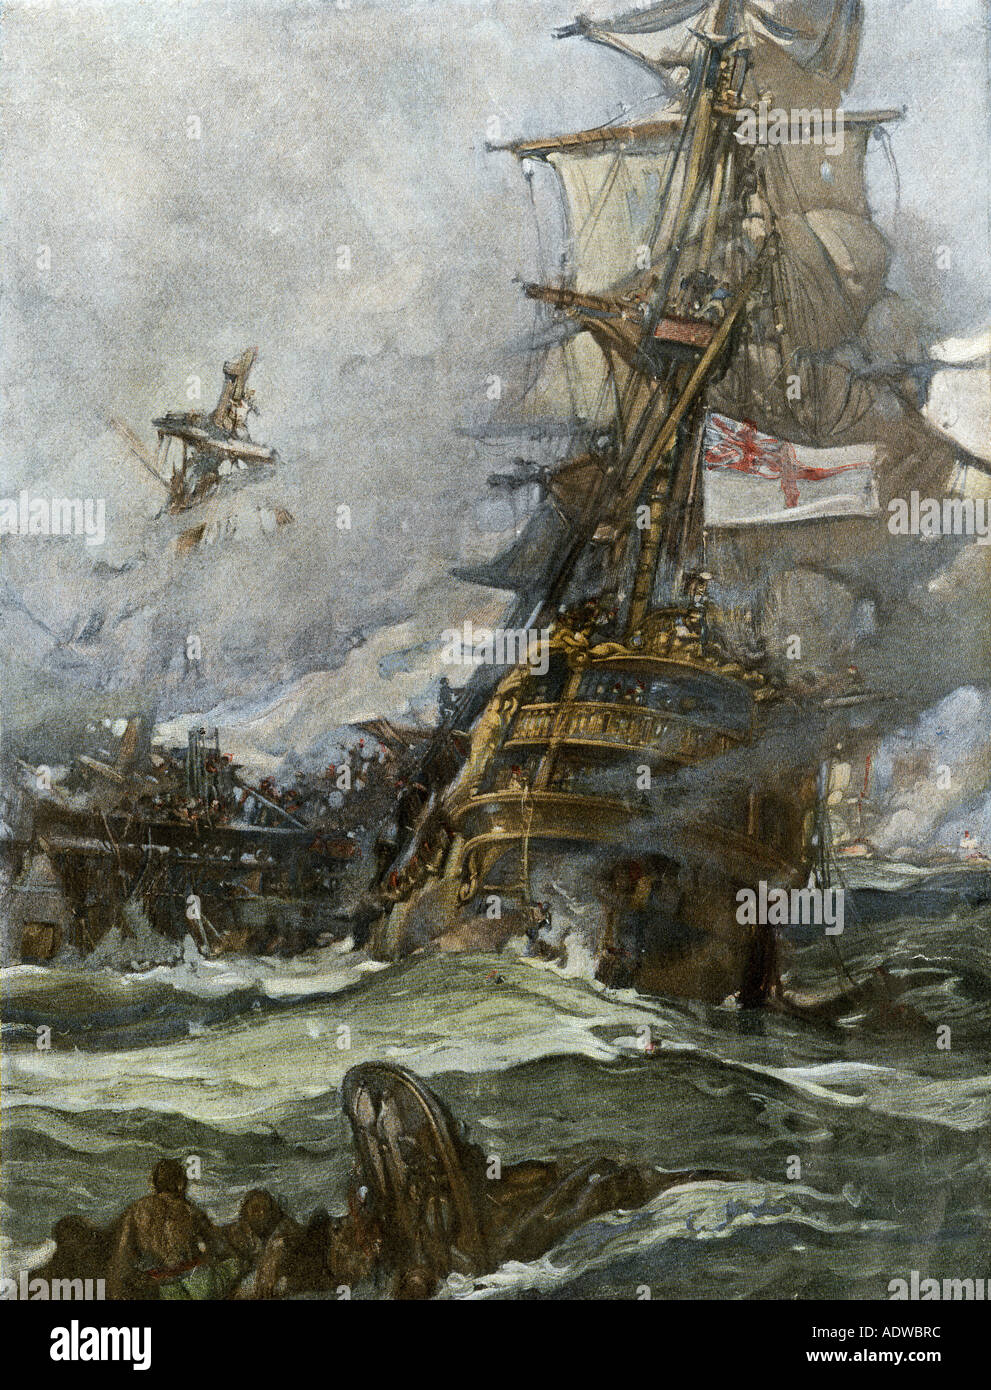 British ship HMS Brunswick in battle with French navy off the coast of Brittany late 1700s. Color halftone of an illustration Stock Photo